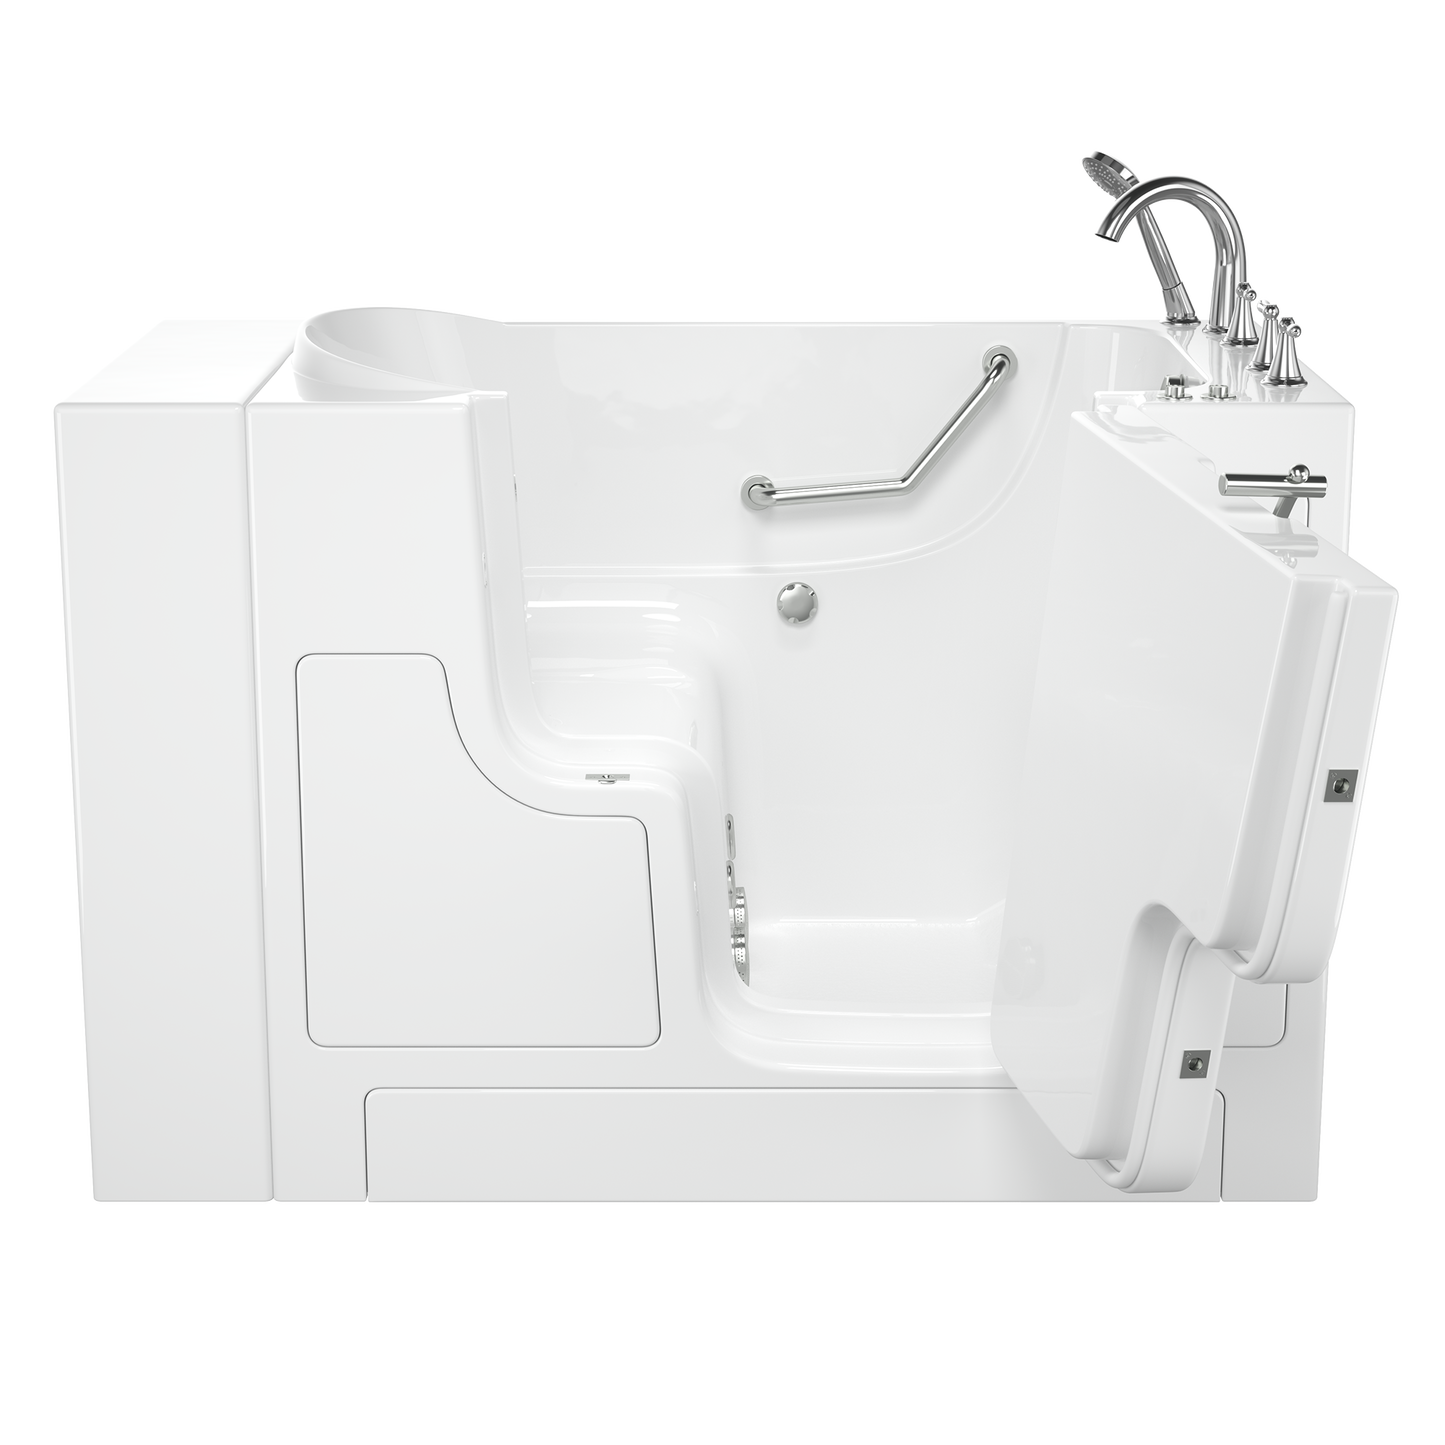 AMERICAN-STANDARD SS9OD5230RJ-WH-PC, Gelcoat Premium Series 30 in. x 52 in. Outward Opening Door Walk-In Bathtub with Whirlpool system in Wib White